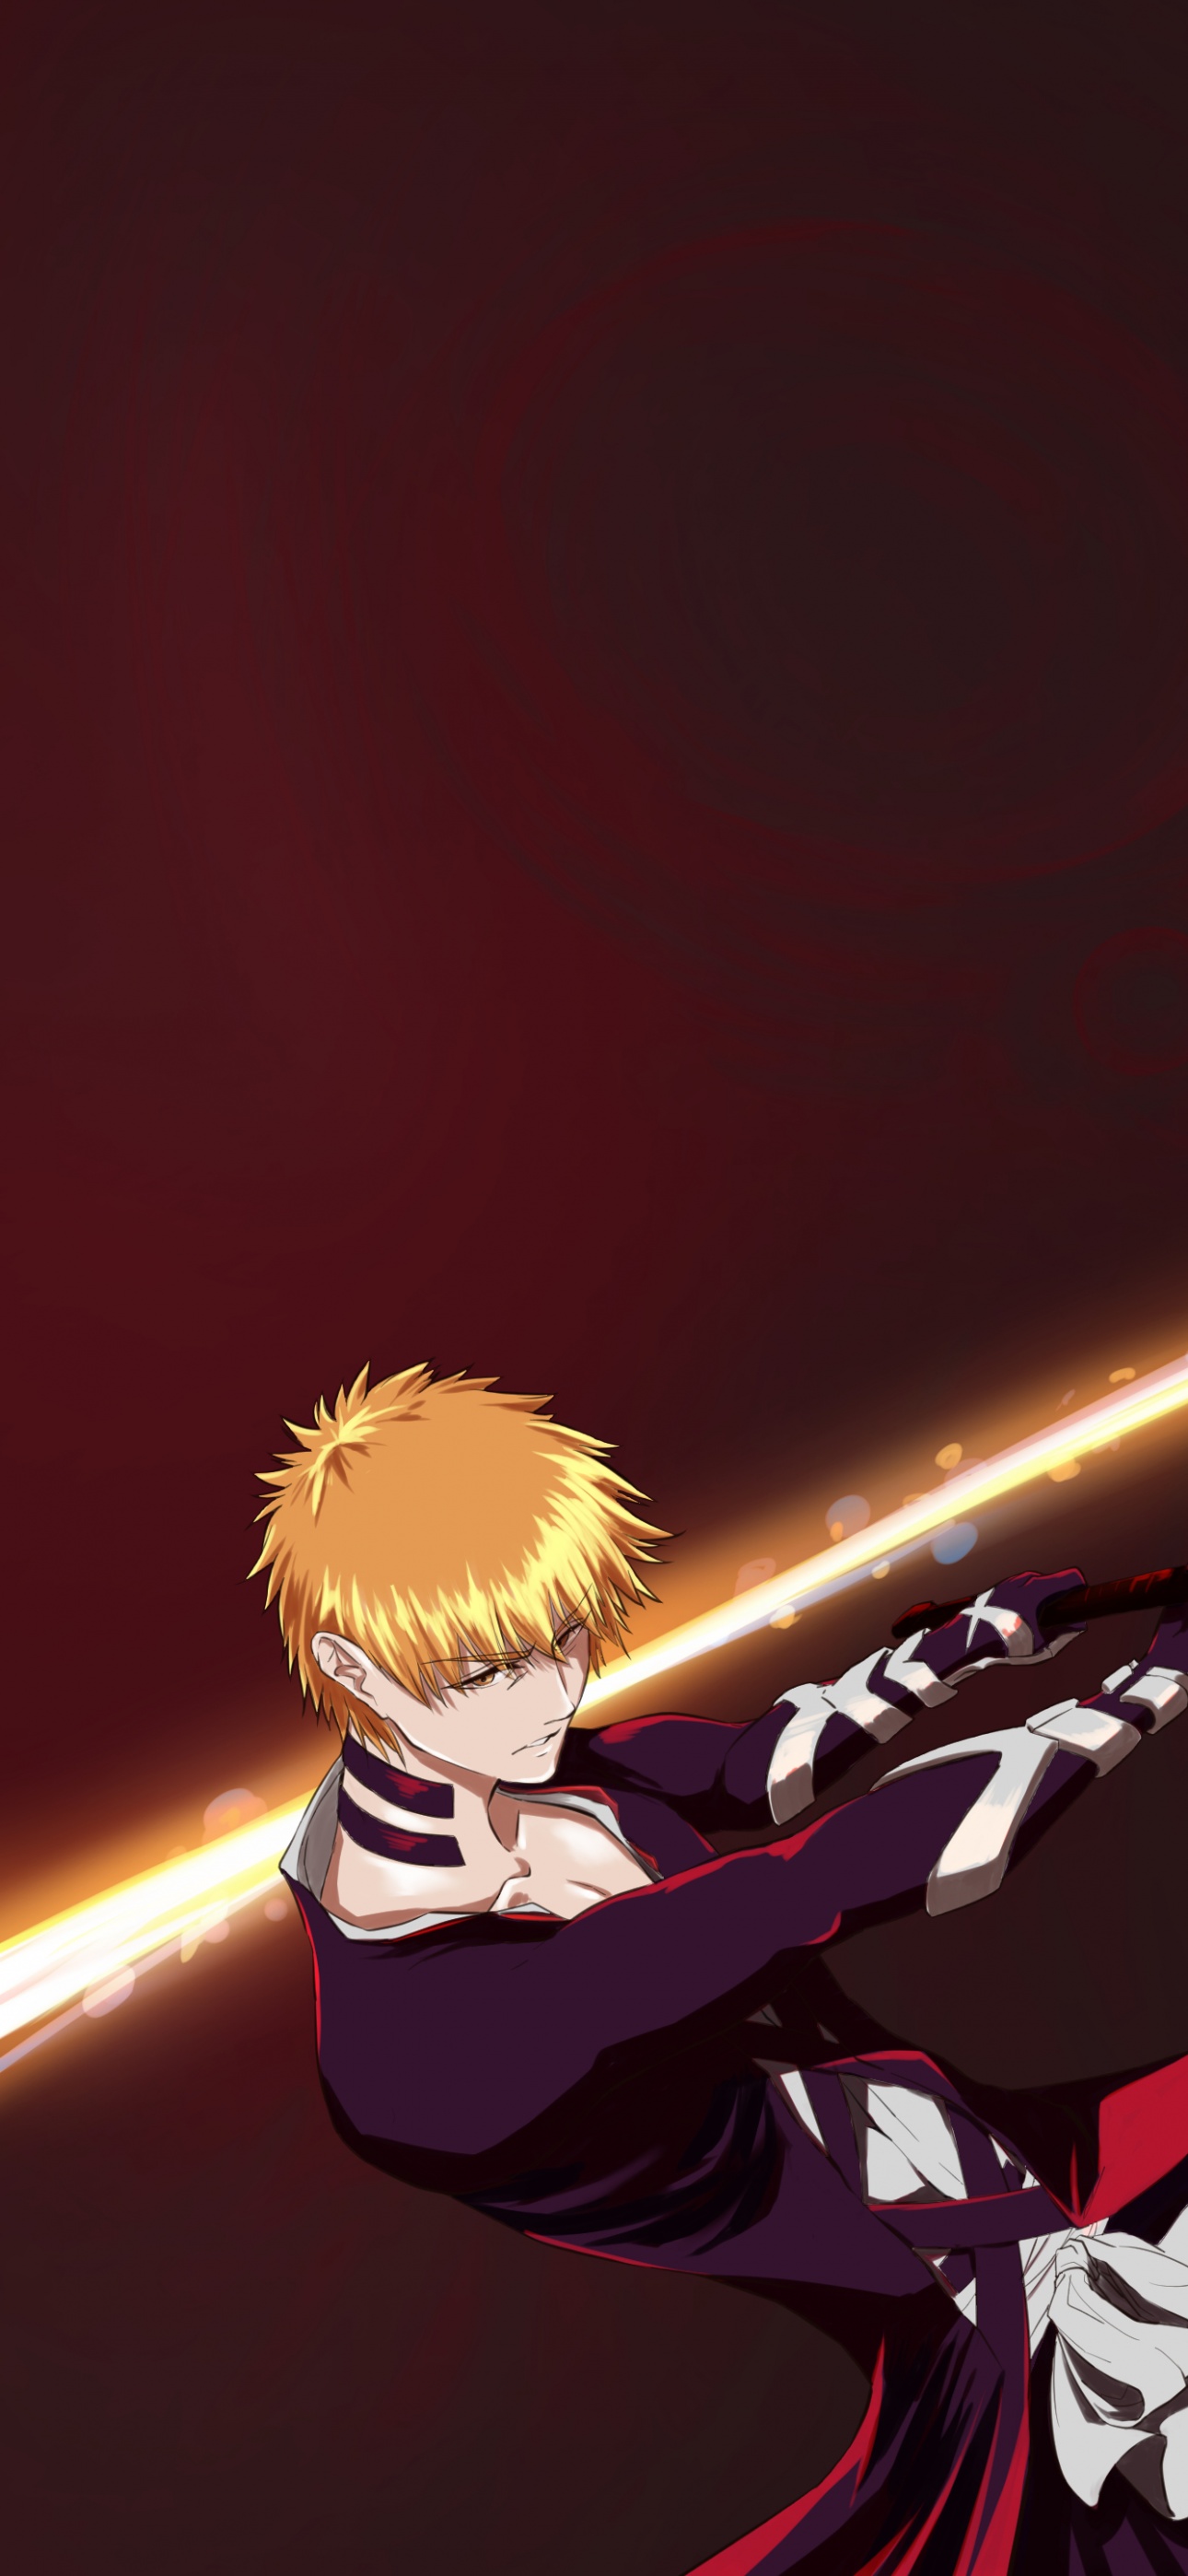 Bleach wallpaper by vld2400  Download on ZEDGE  2eb5  Bleach anime  ichigo Bleach anime art Bleach anime